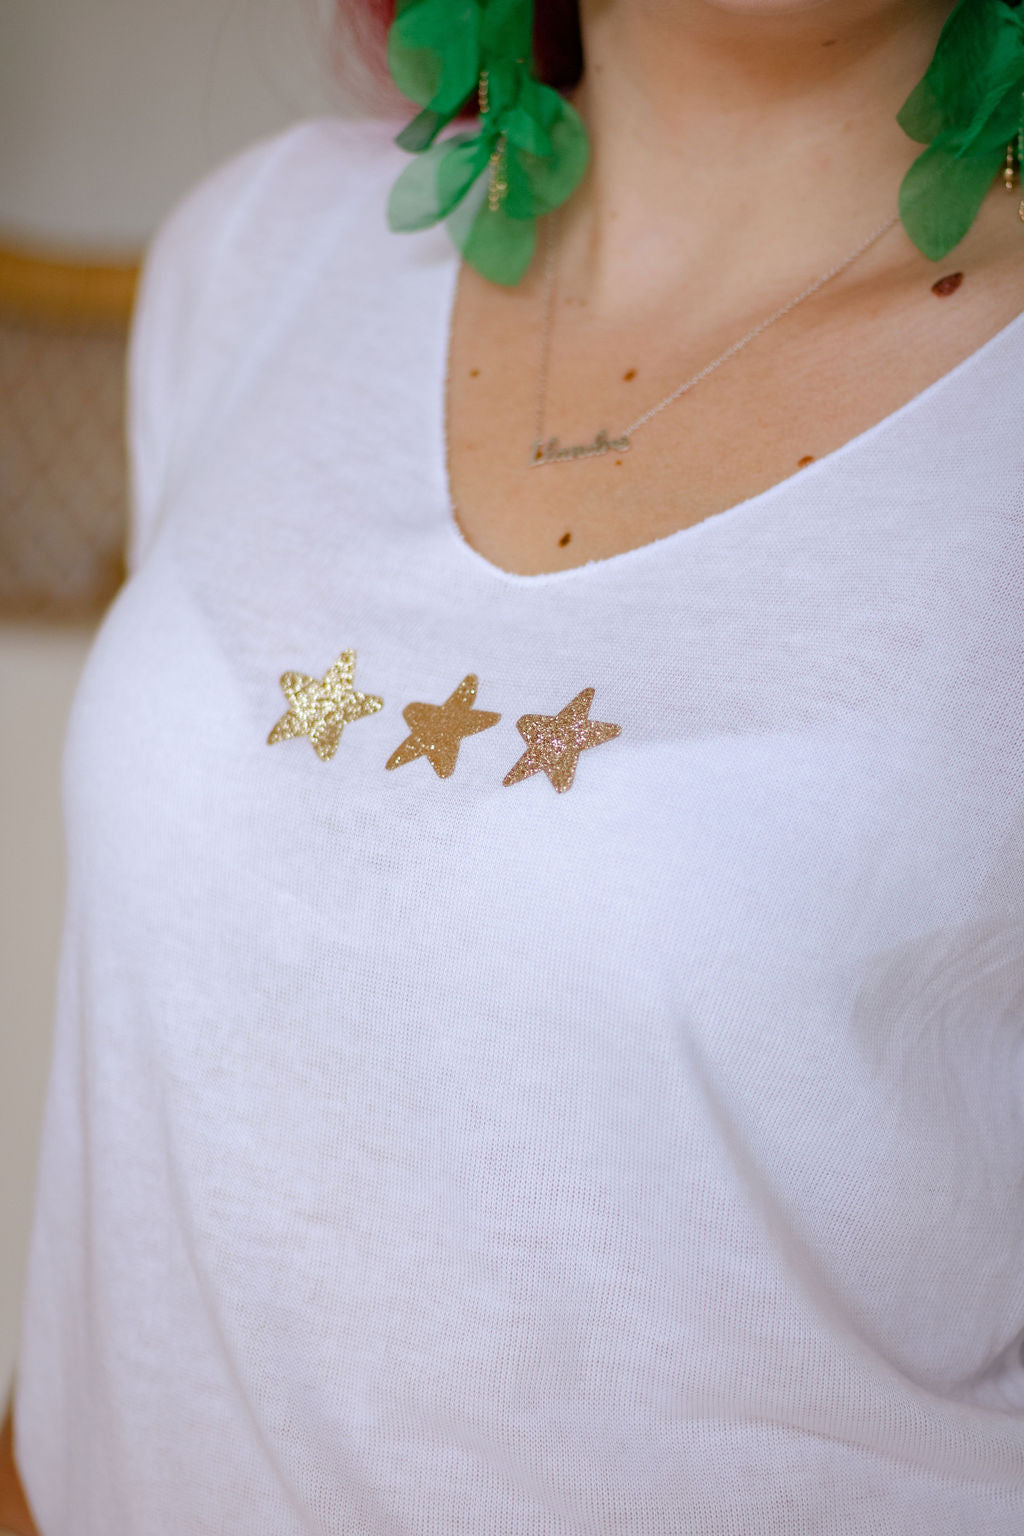 Made in Italy Tee - White Star